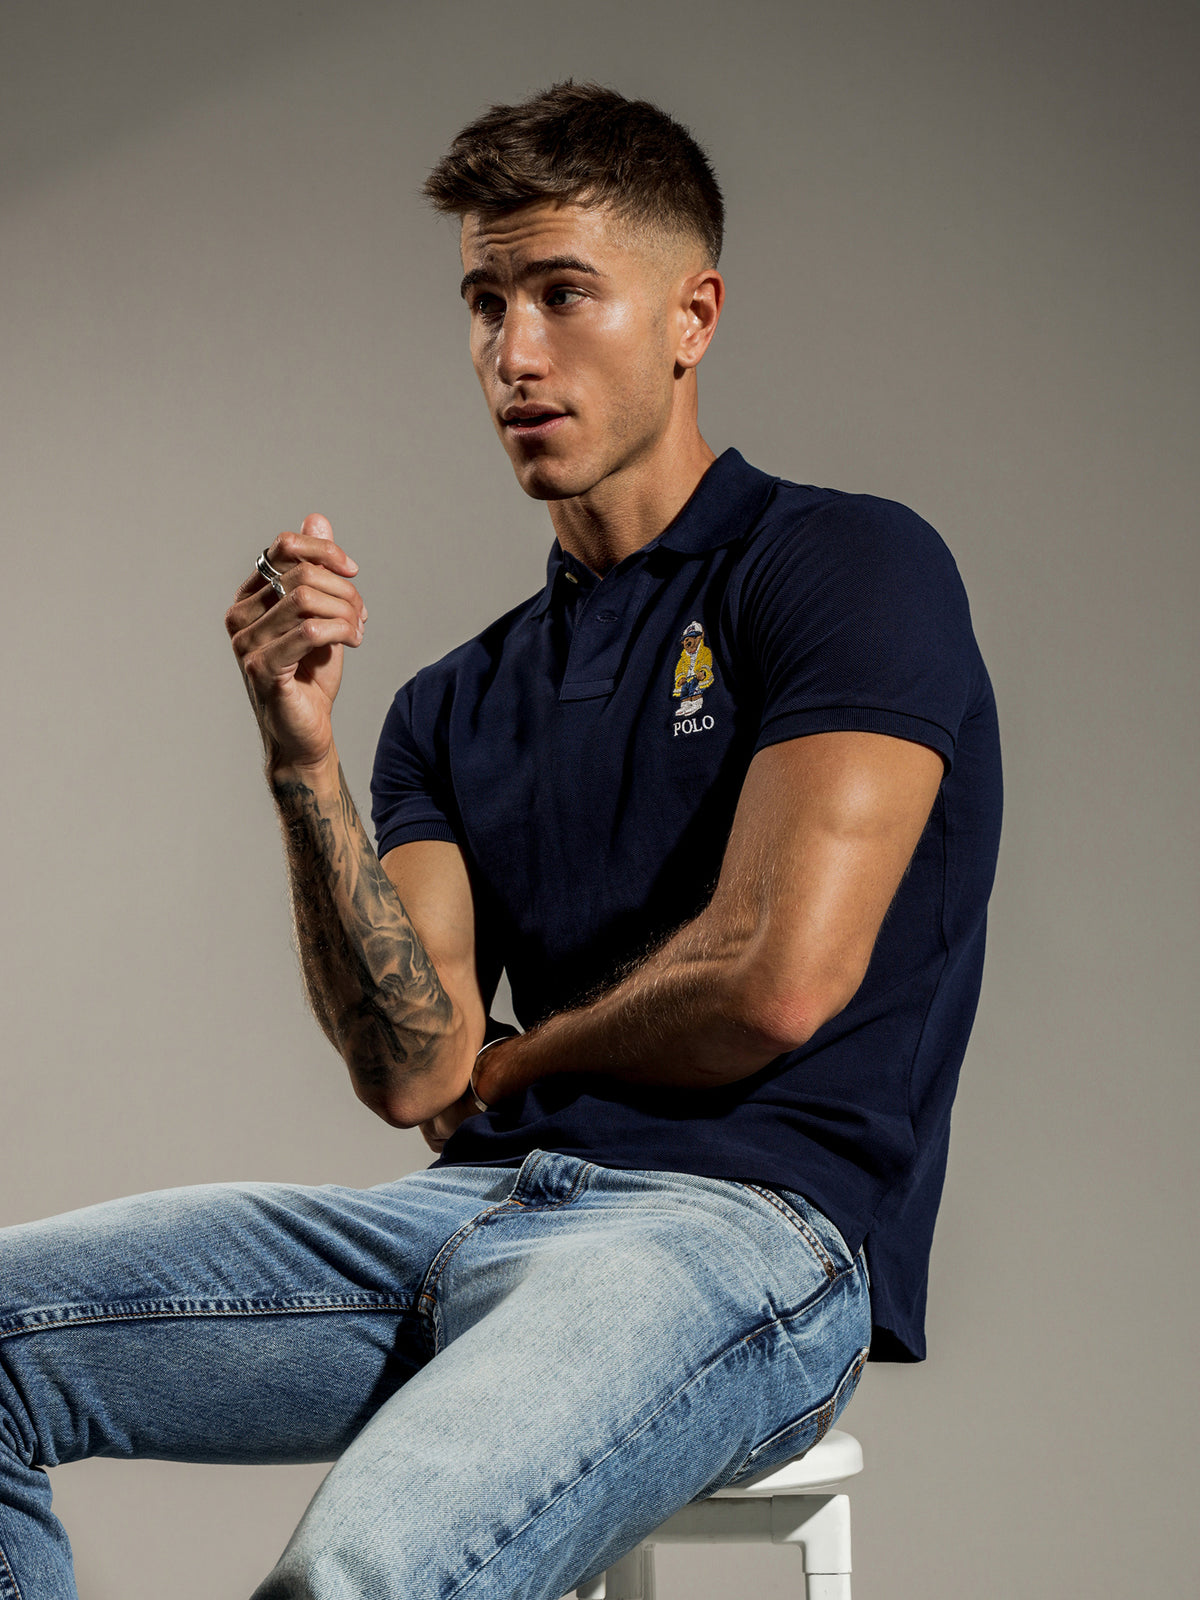 Teddy Embroidered Polo T-Shirt in Navy